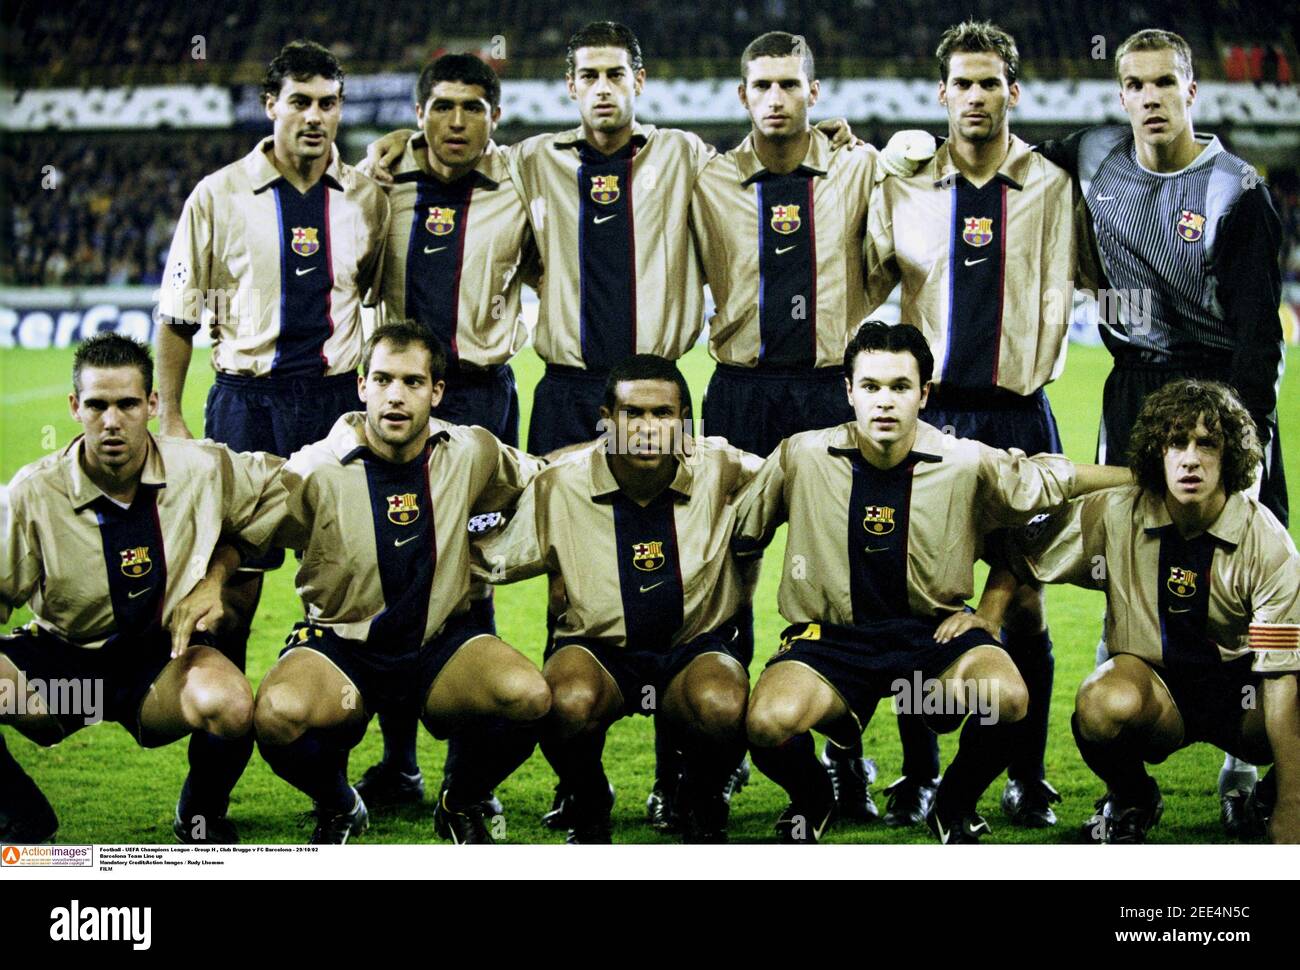 Football - UEFA Champions League - Group H , Club Brugge v FC Barcelona -  29/10/02 Barcelona Team Line up Mandatory Credit:Action Images / Rudy Lhomme  FILM Stock Photo - Alamy